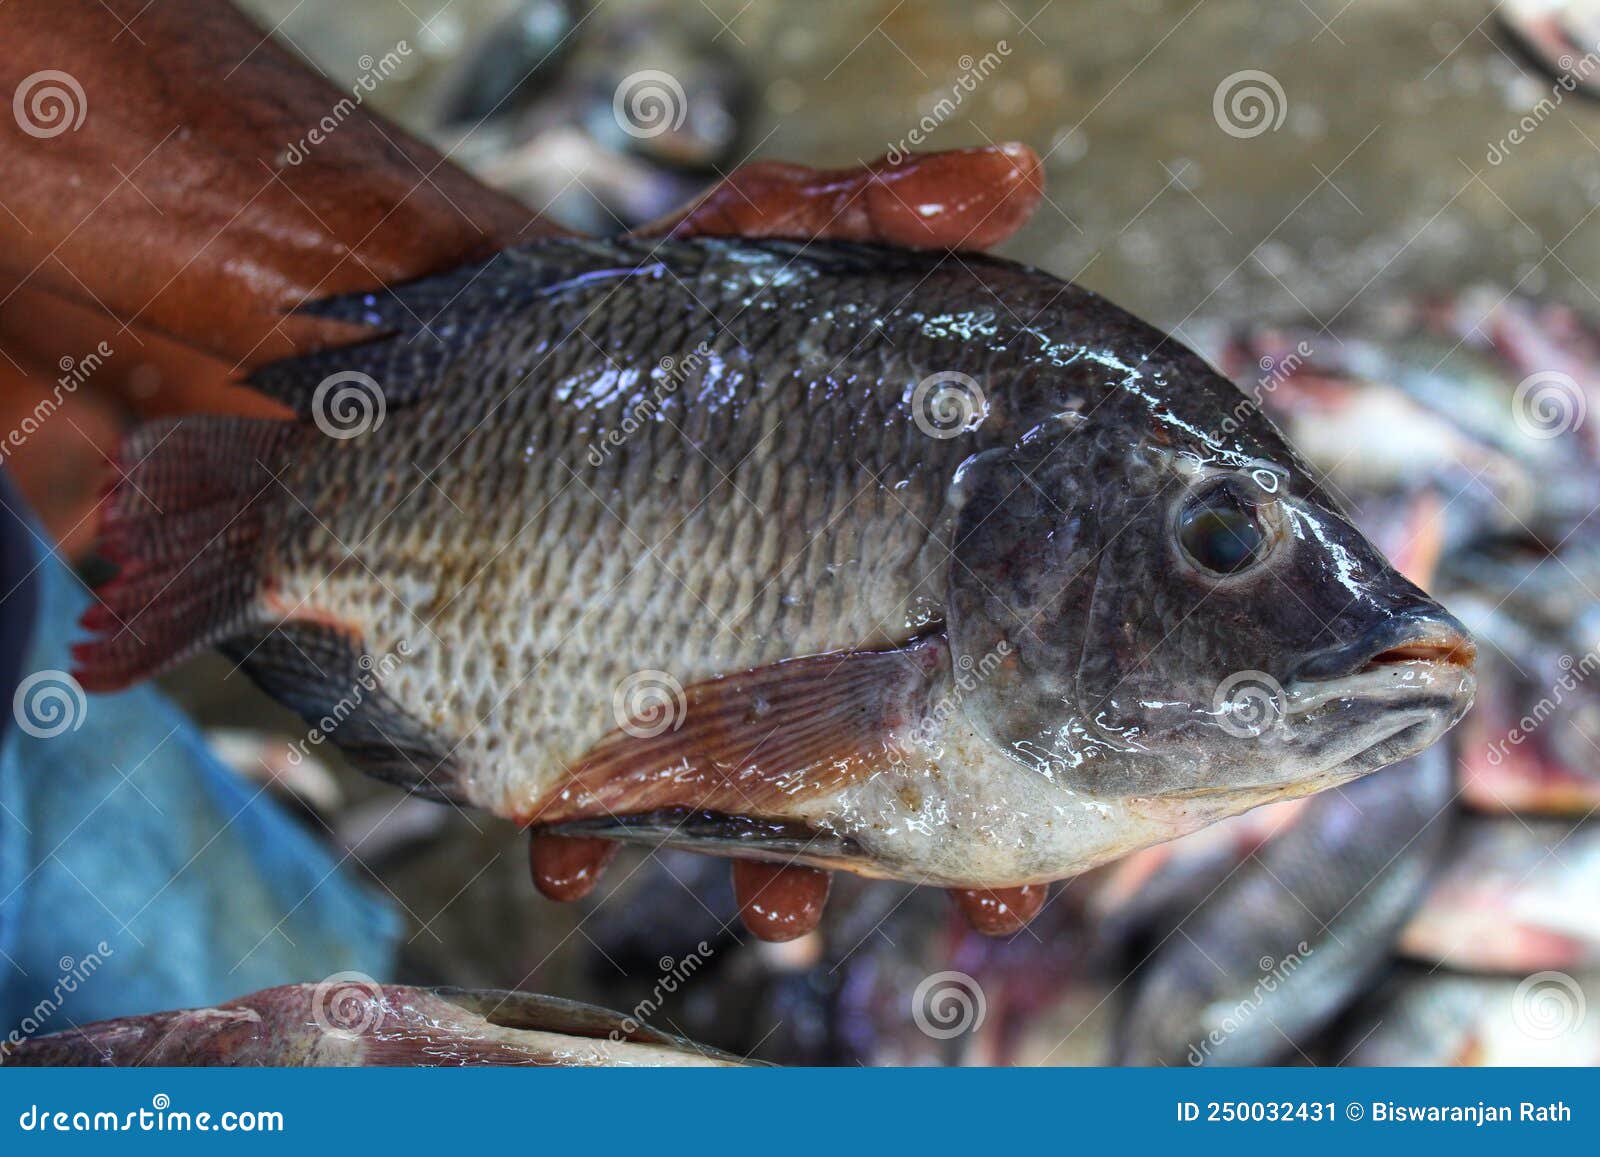 Big Genetically Improved GMO GIFT Tilapia Fish in Hand of a Fish Farmer  Stock Image - Image of sale, cuisine: 250032431